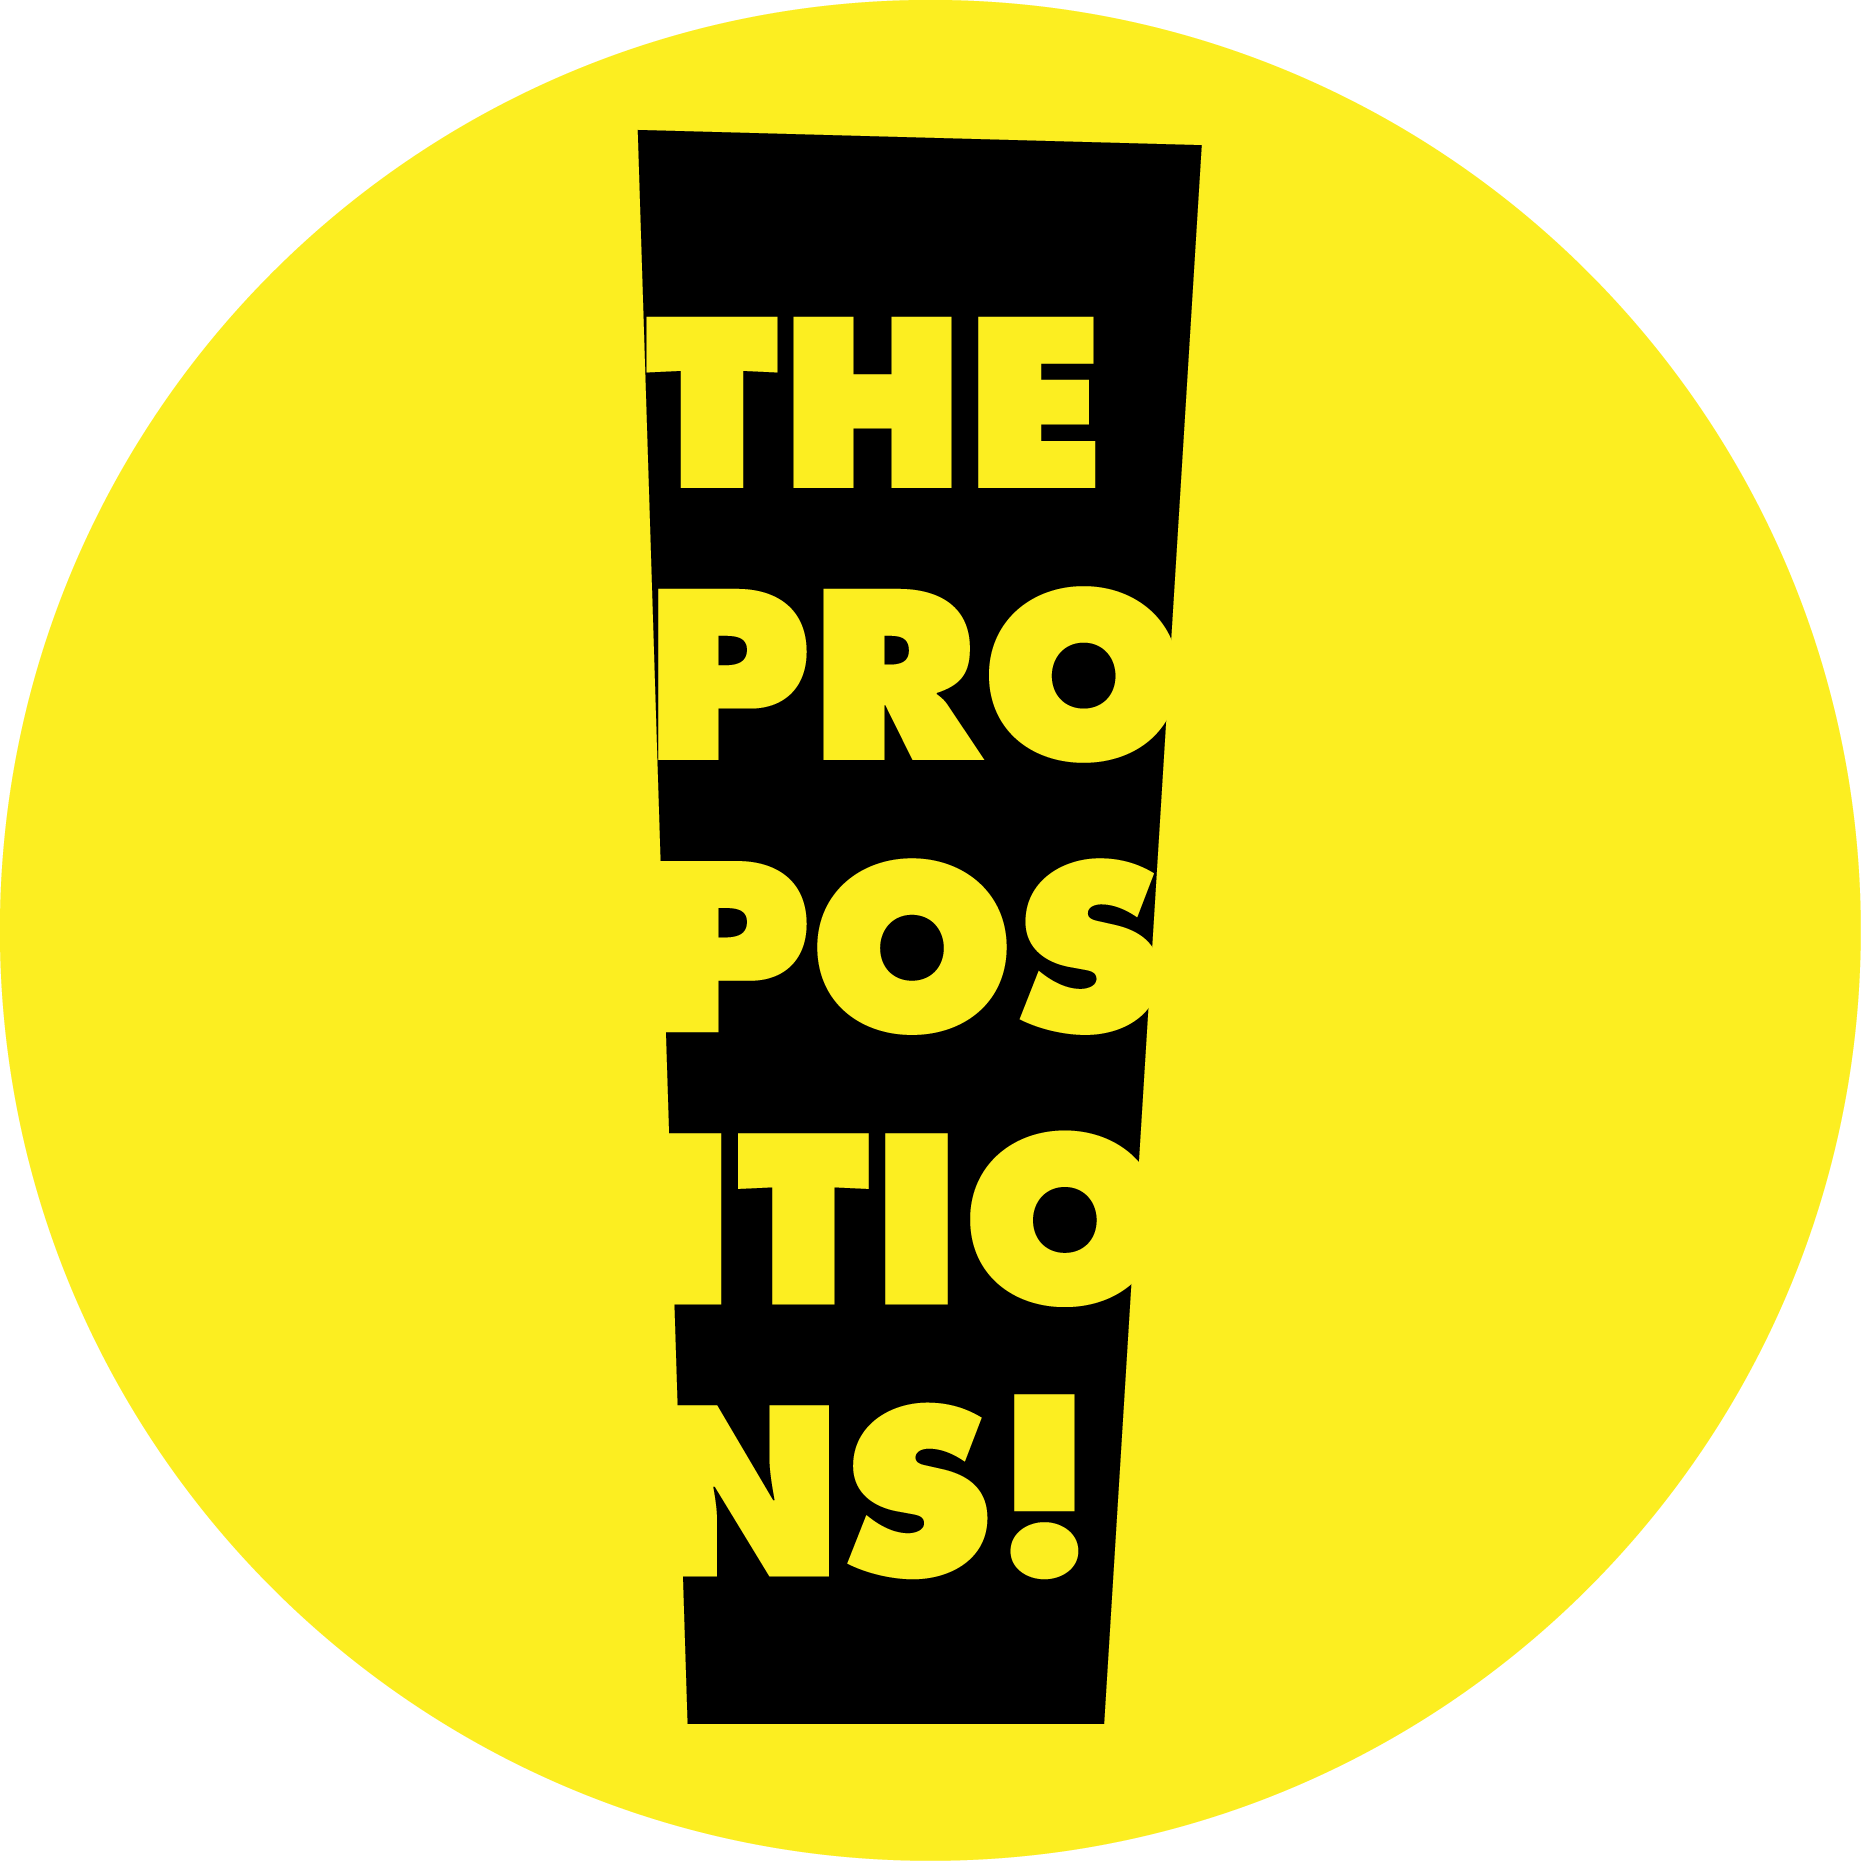 The Propositions